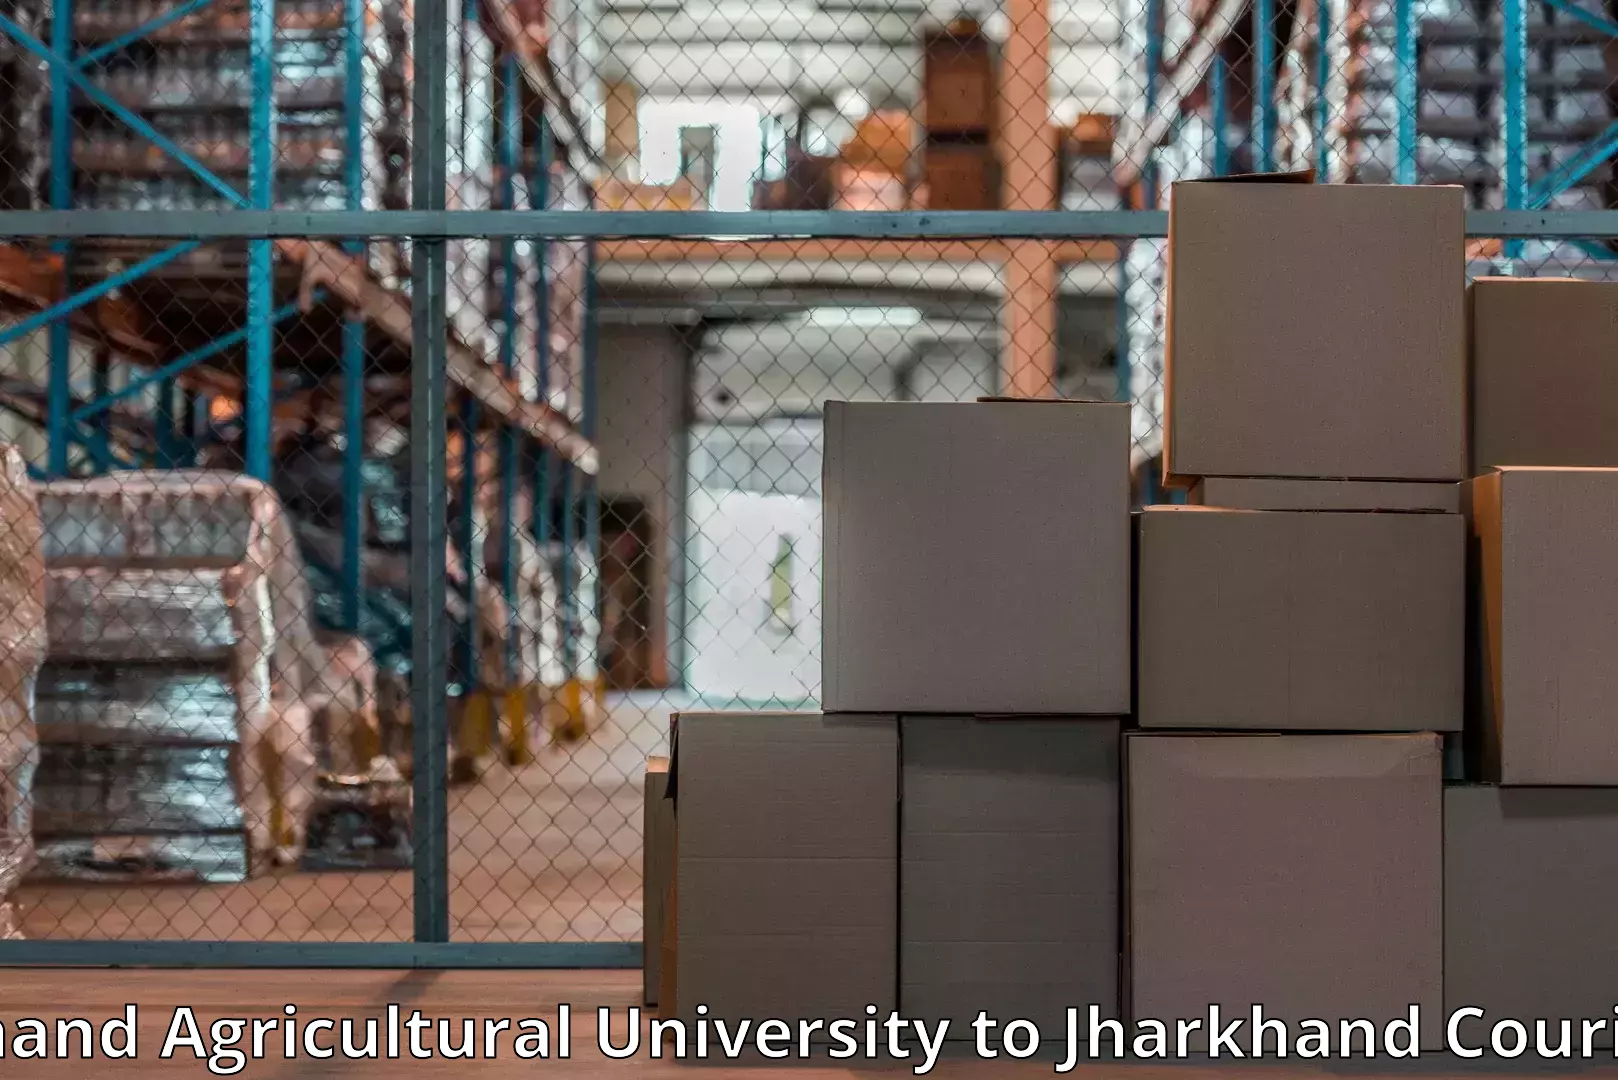 Hassle-free relocation Anand Agricultural University to Jharkhand